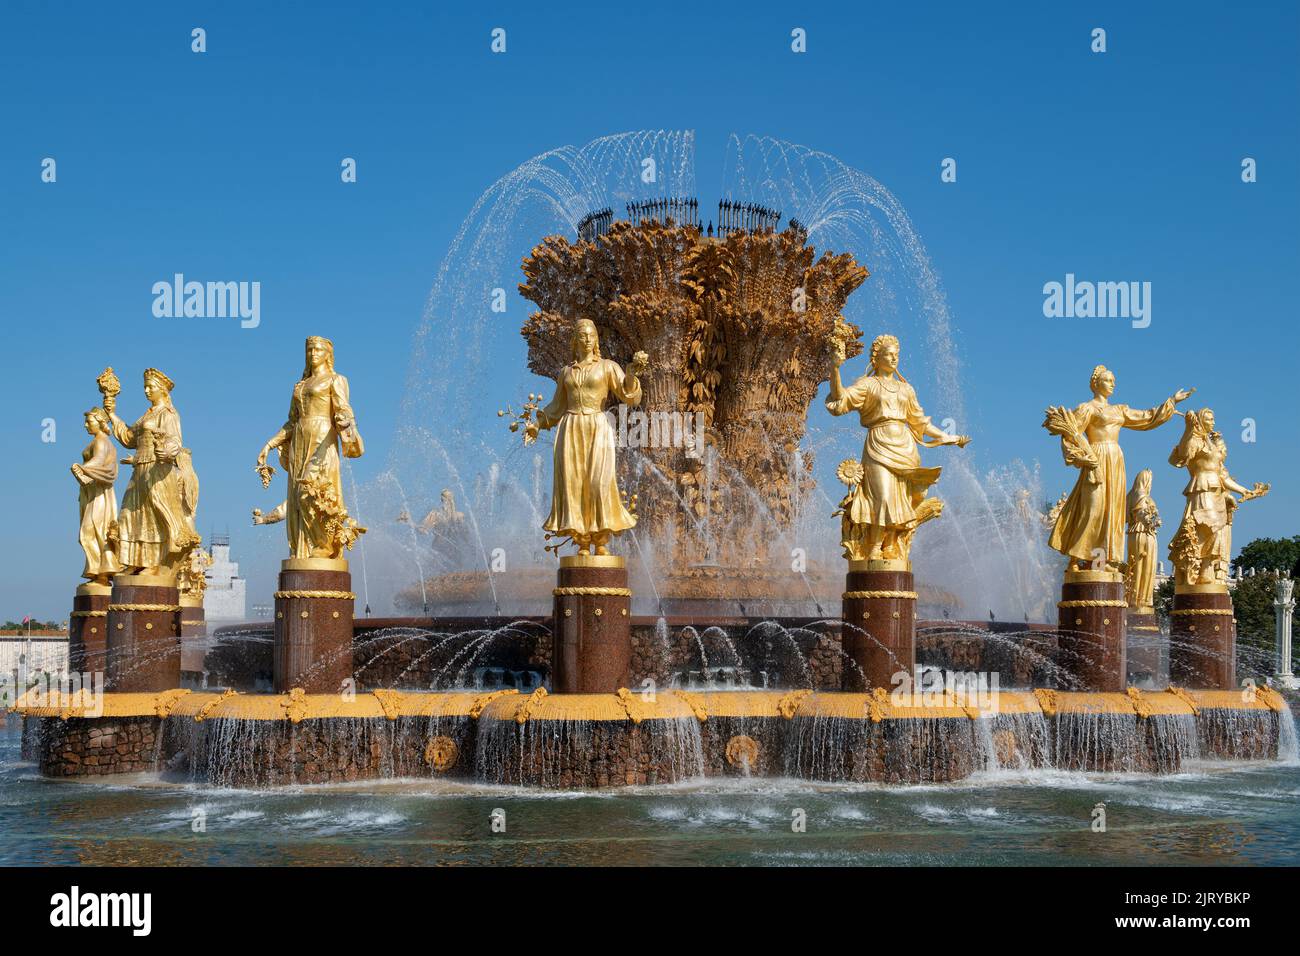 MOSCOW, RUSSIA - AUGUST 17, 2022: Famous fountain 'Friendship of Peoples' close-up on a sunny August day. All-Russian Exhibition Center (VDNKh) Stock Photo